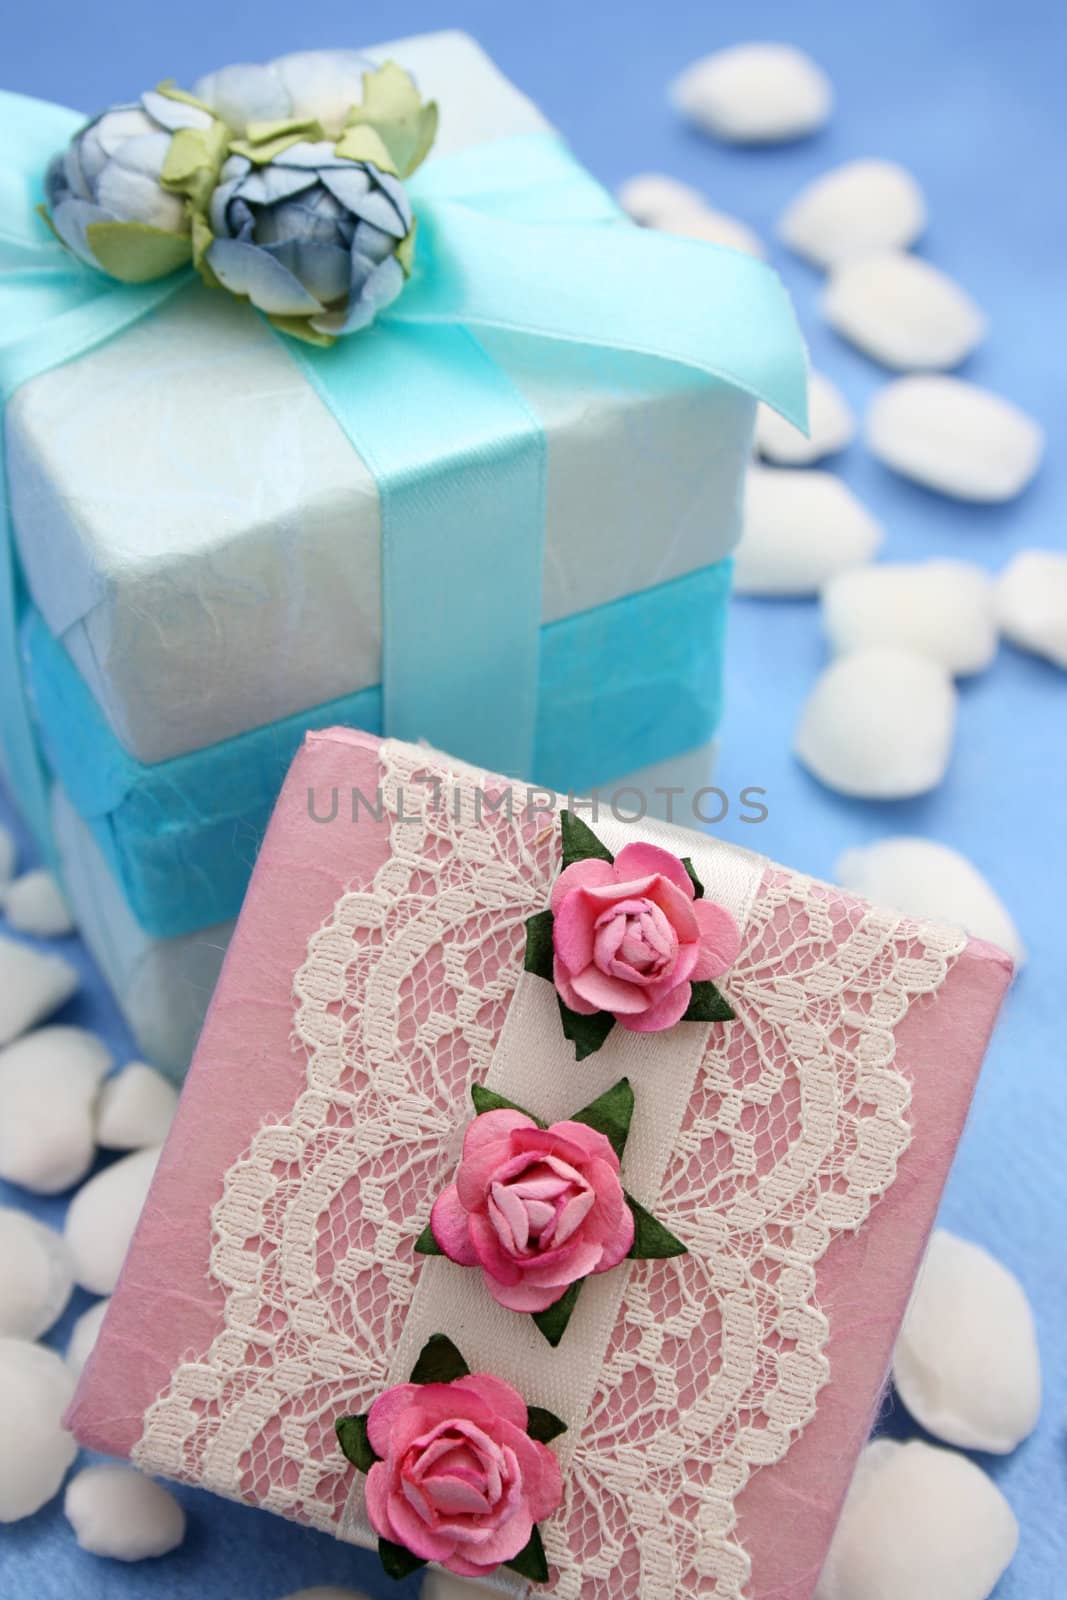 Soap gifts in pink and blue with white bath crystals